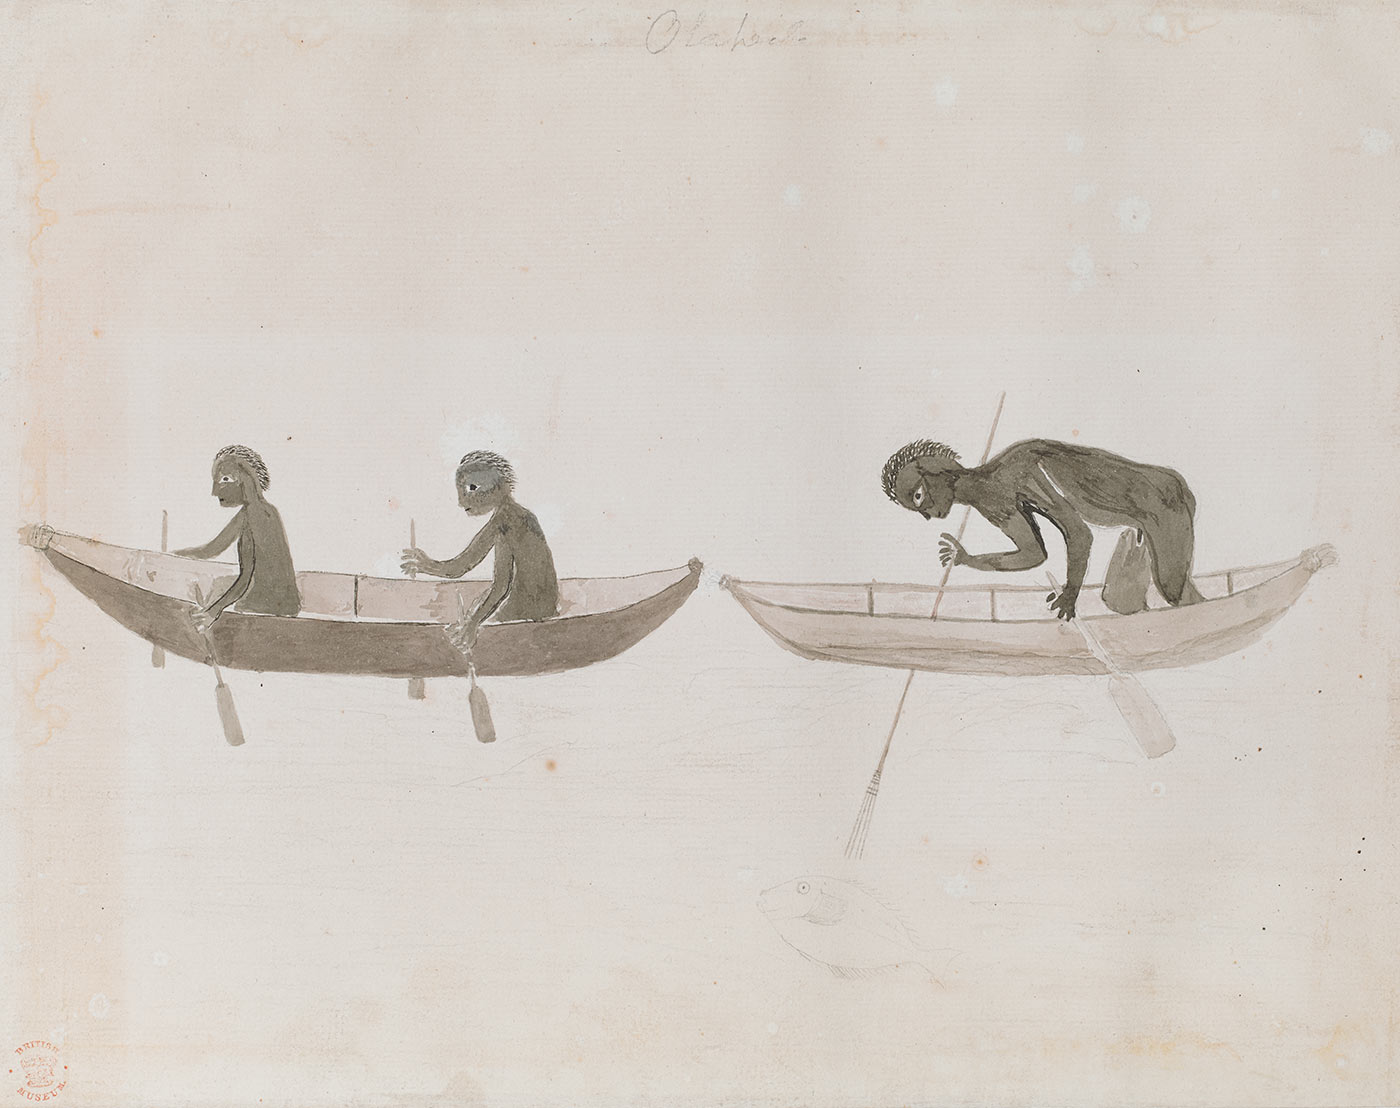 Artwork featuring people in canoes. One person is spearing a fish which is swimming below the water’s surface. There is faint handwriting at the top of the artwork and a red stamp in the bottom left corner.